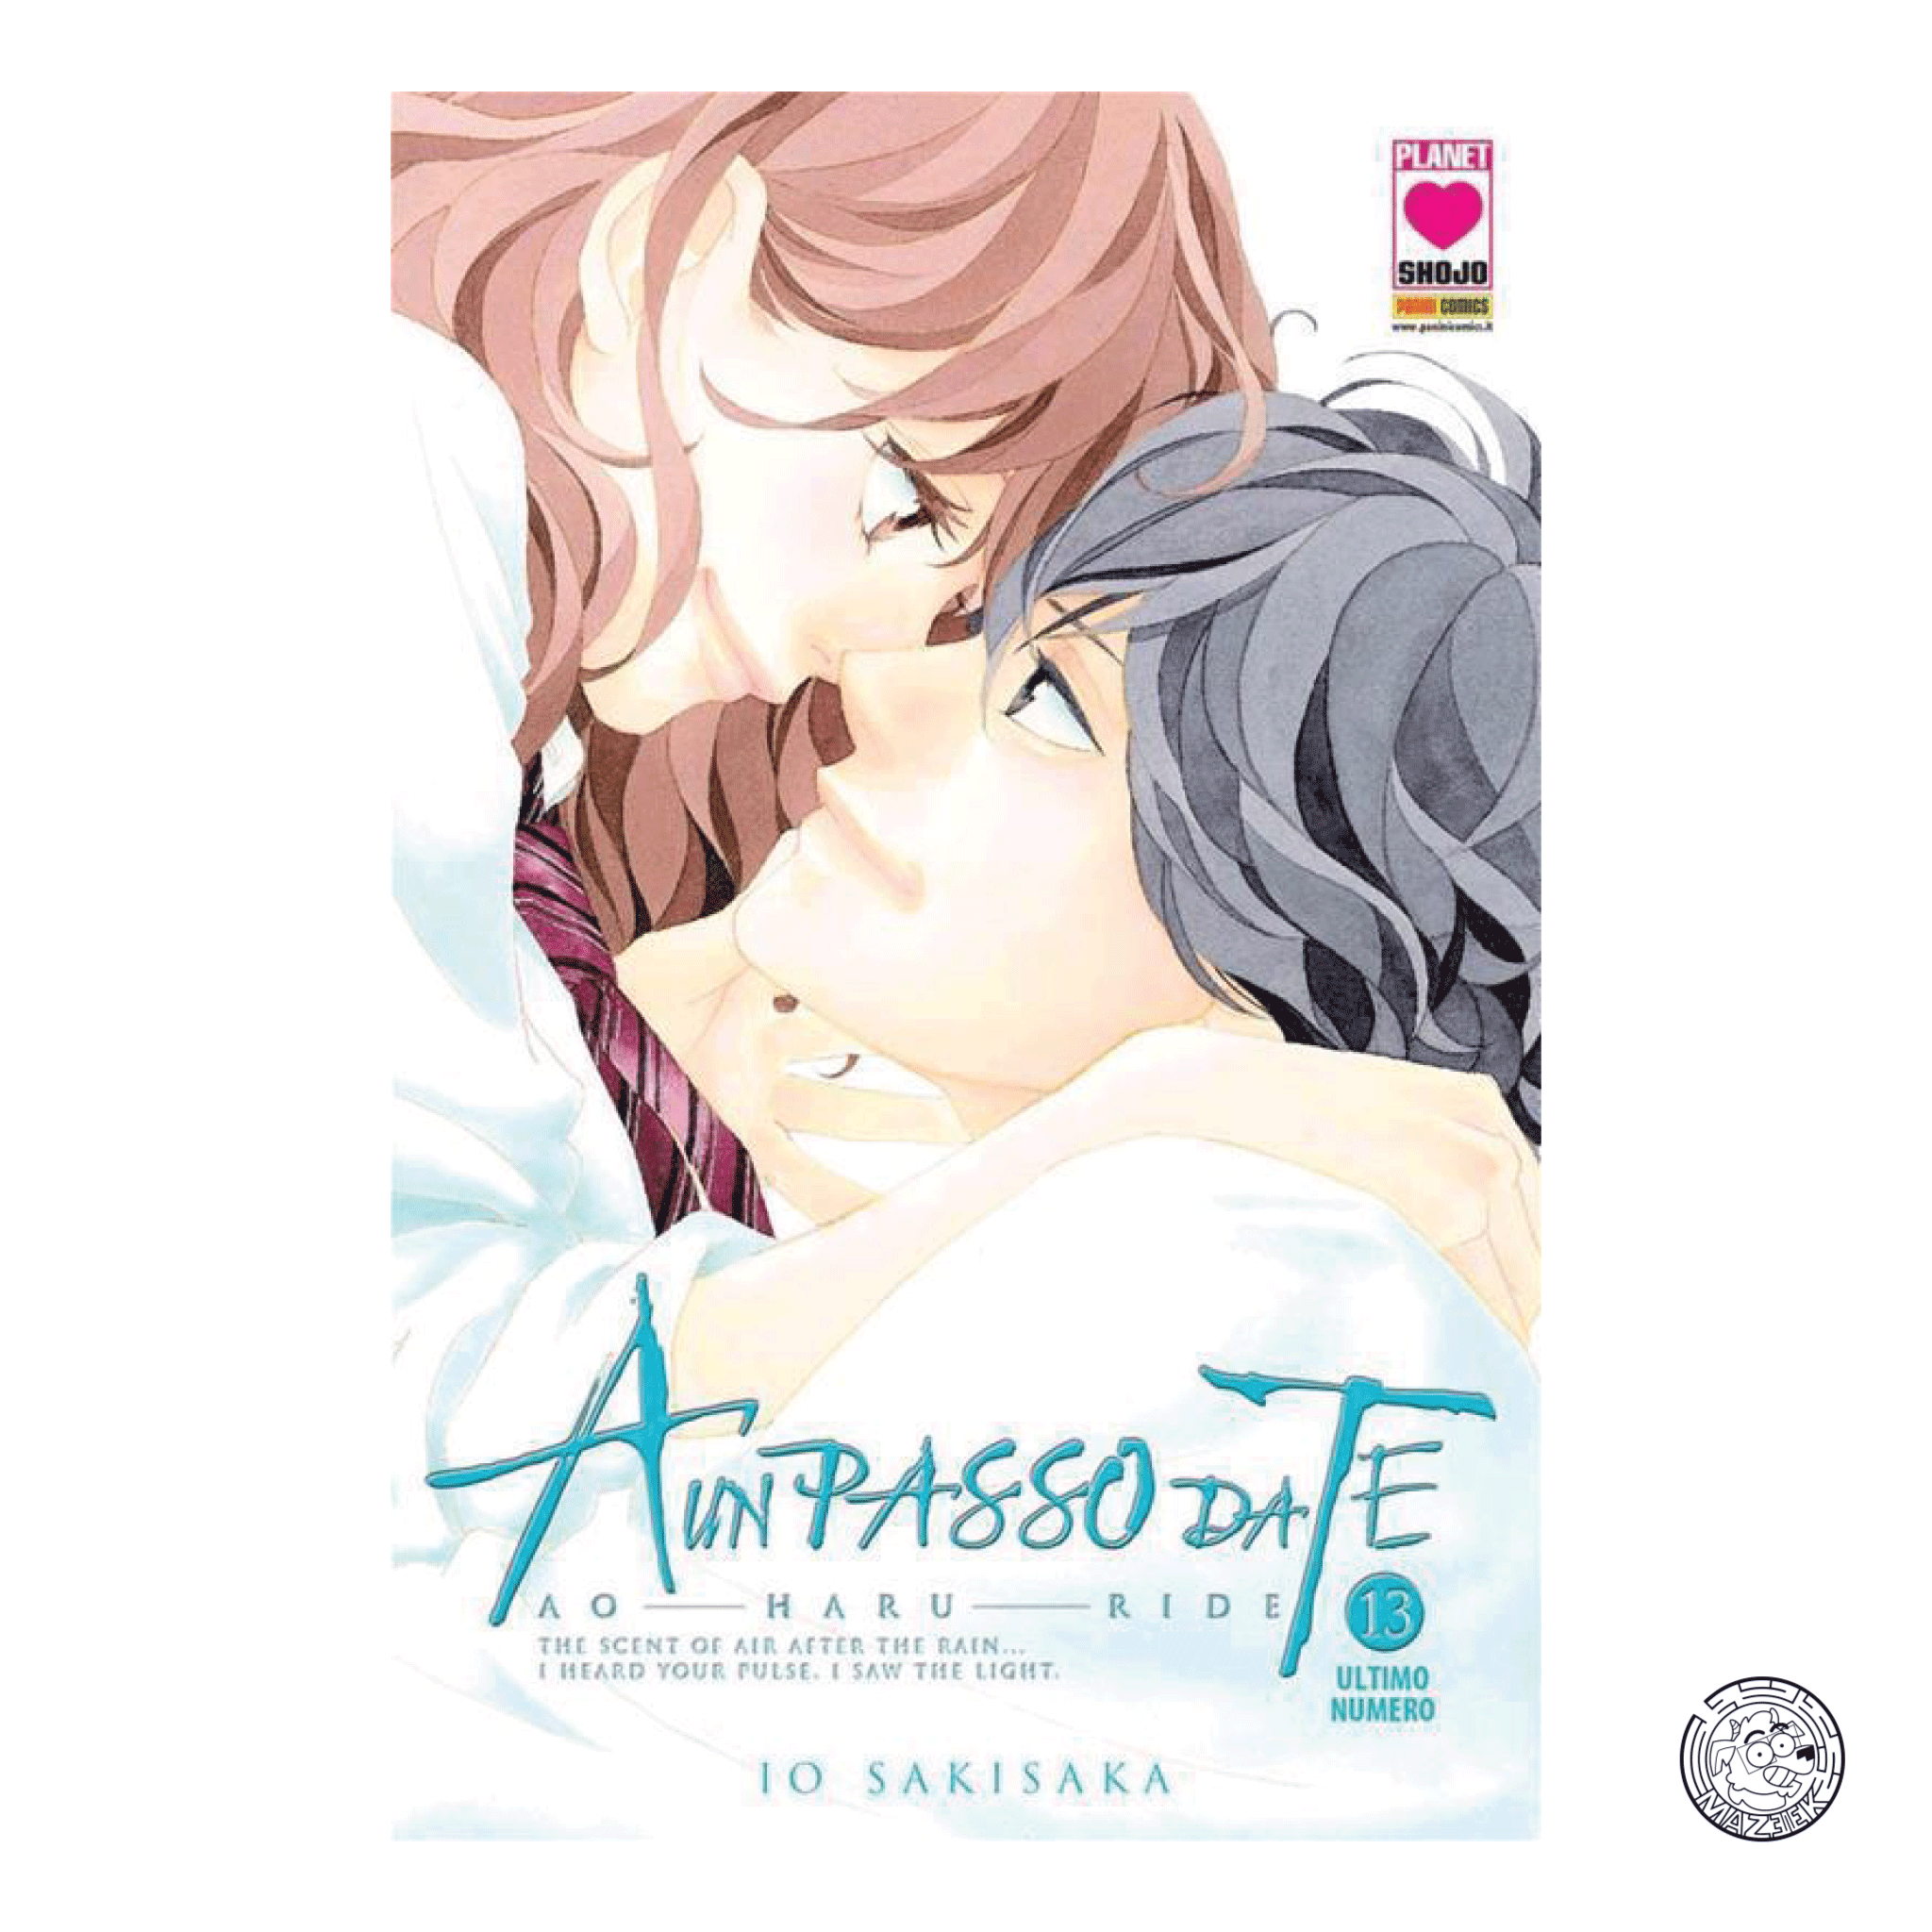 One step away from you: AO HARU RIDE 13 - Second Printing